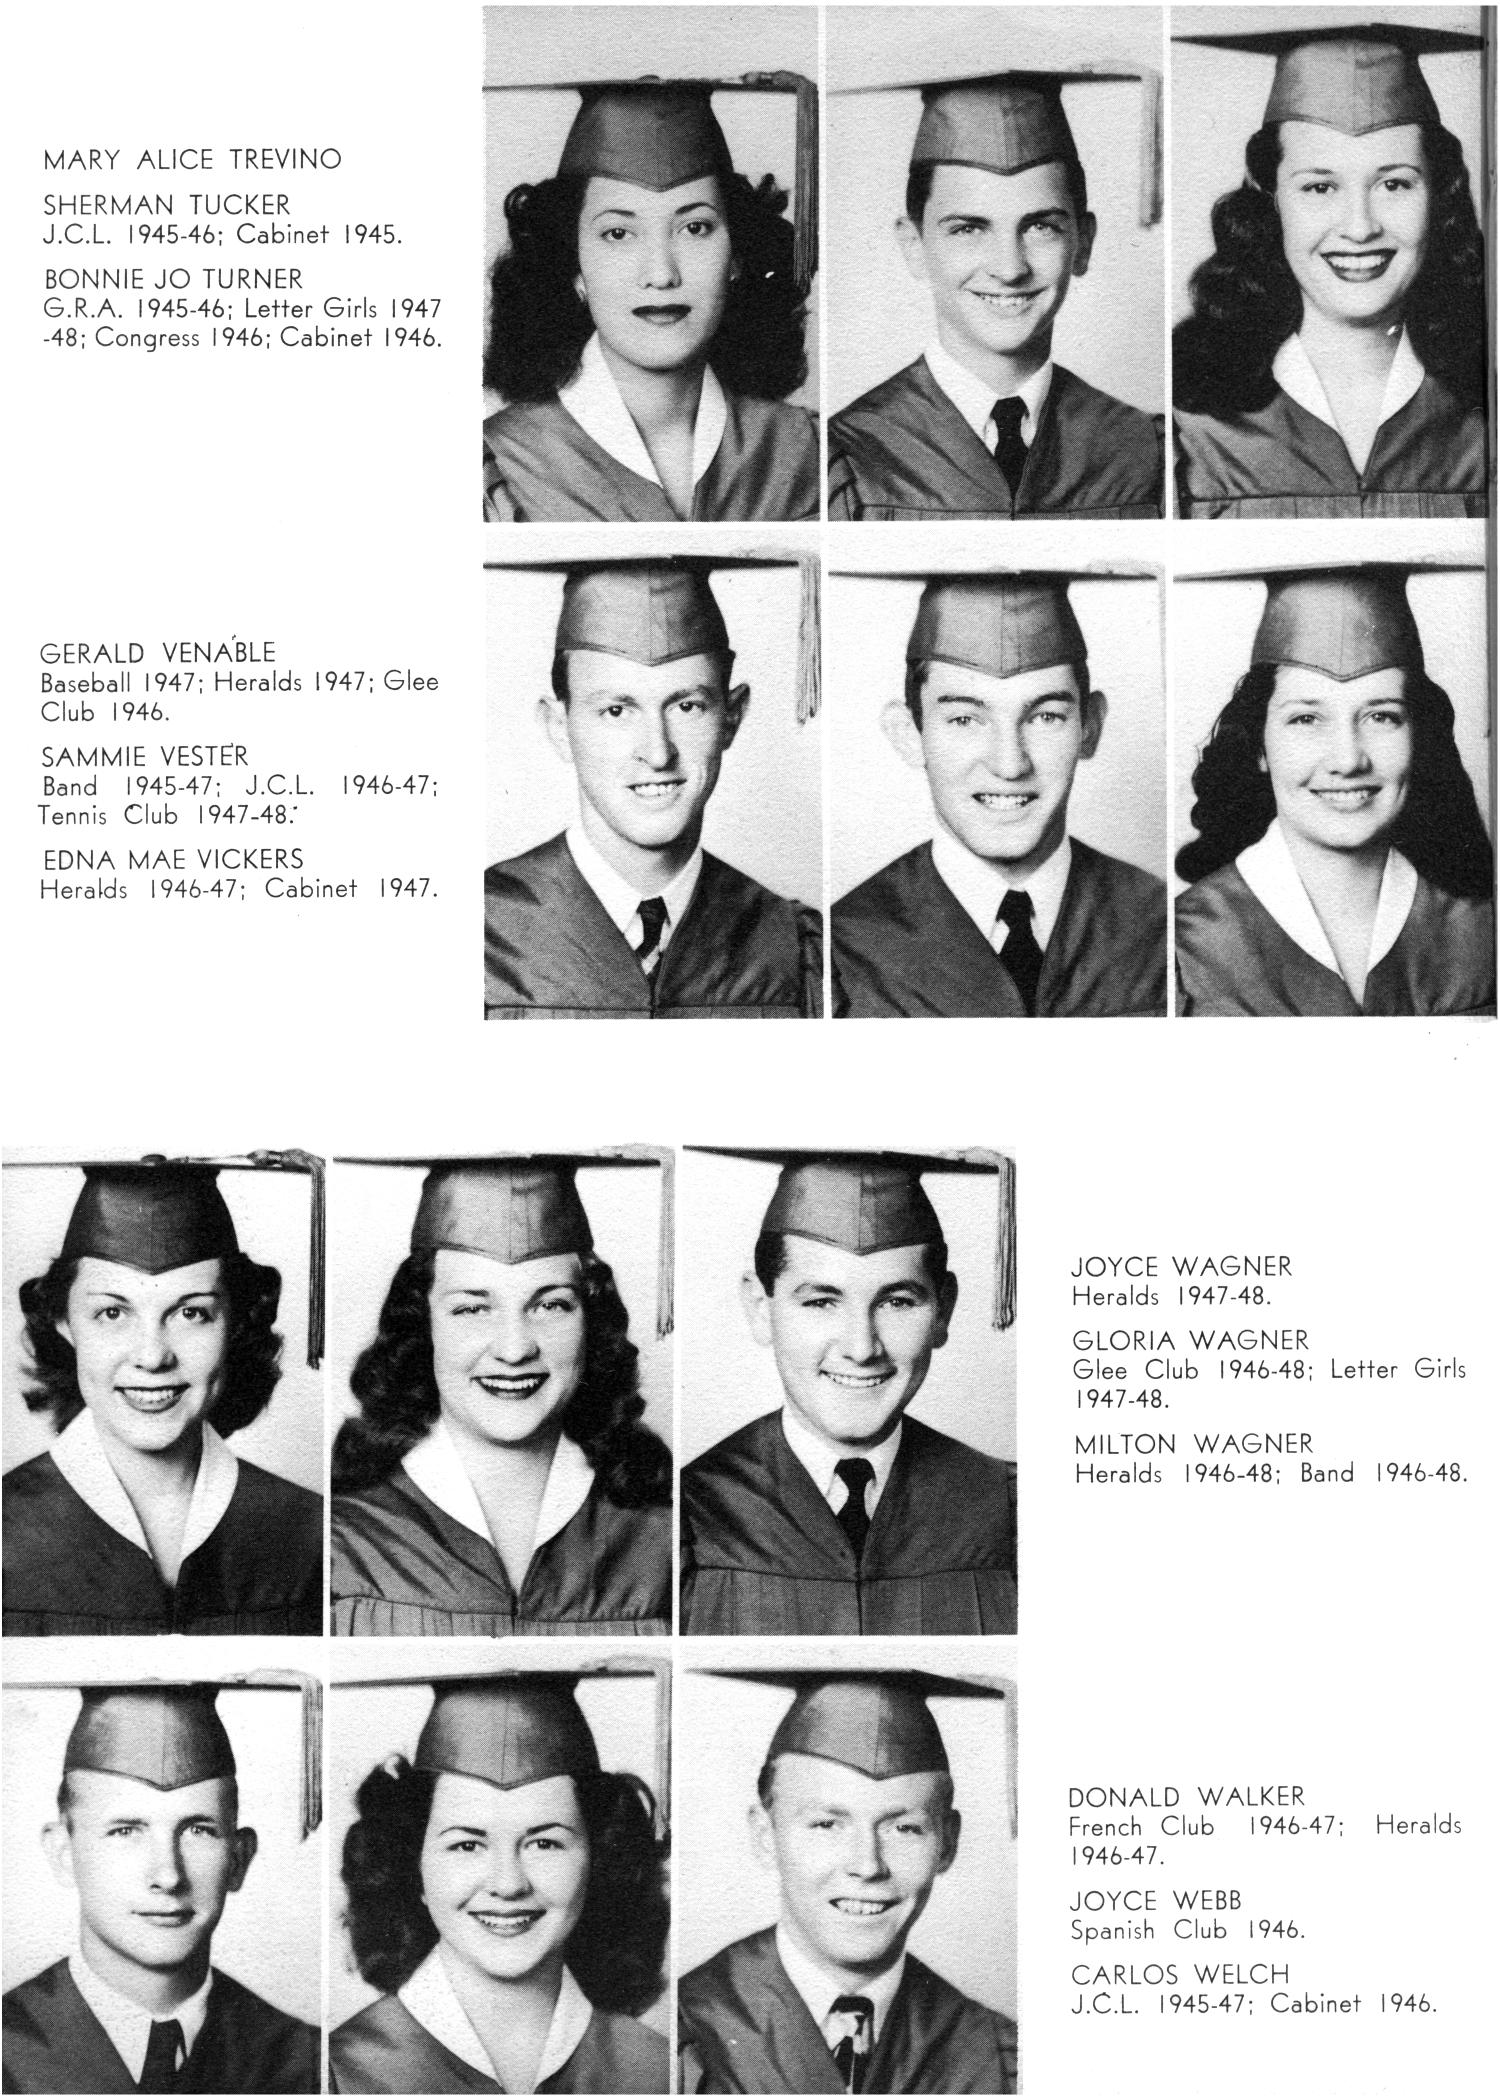 The Yellow Jacket, Yearbook of Thomas Jefferson High School, 1948
                                                
                                                    50
                                                